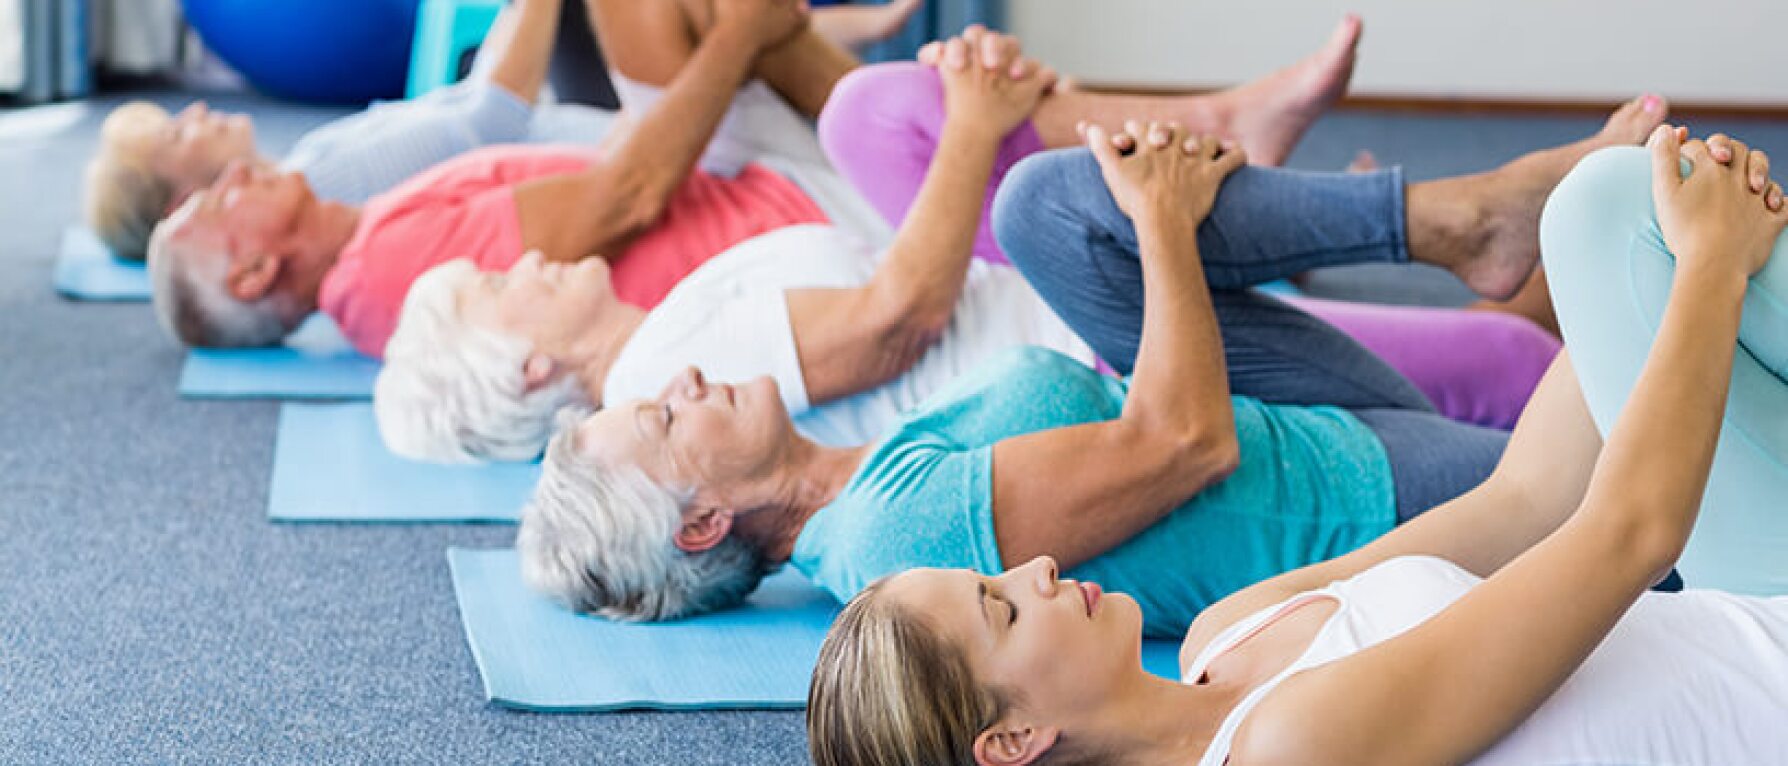 Yoga for Seniors: Is It Right for Everyone? - Senior Fitness For Life